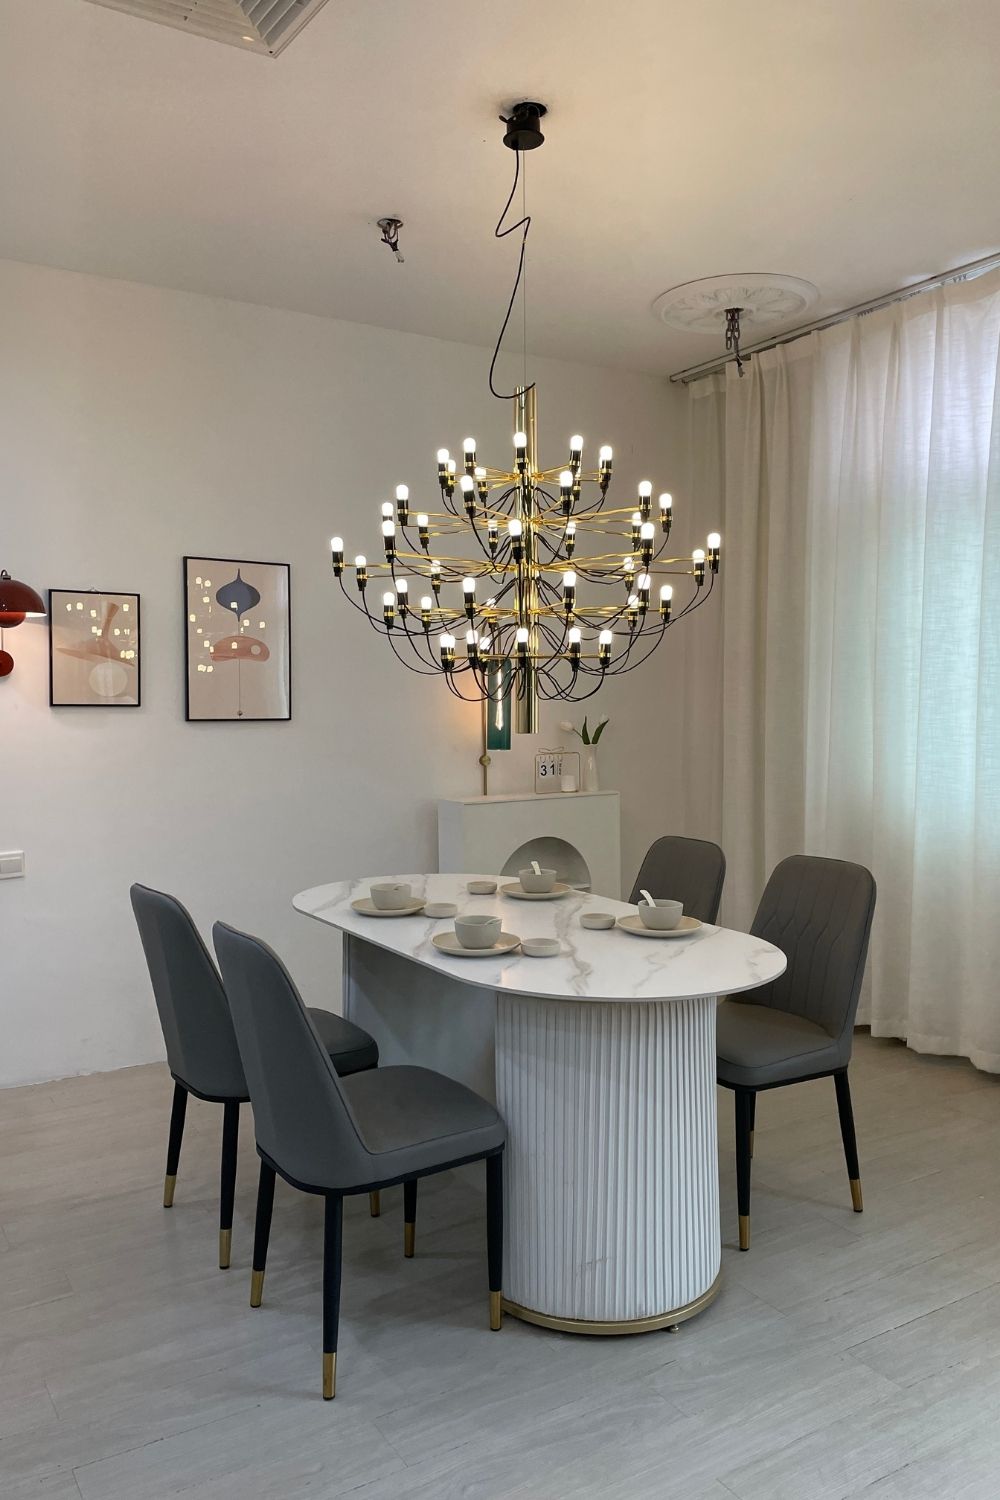 Traditional Mid-century 2097 Chandelier